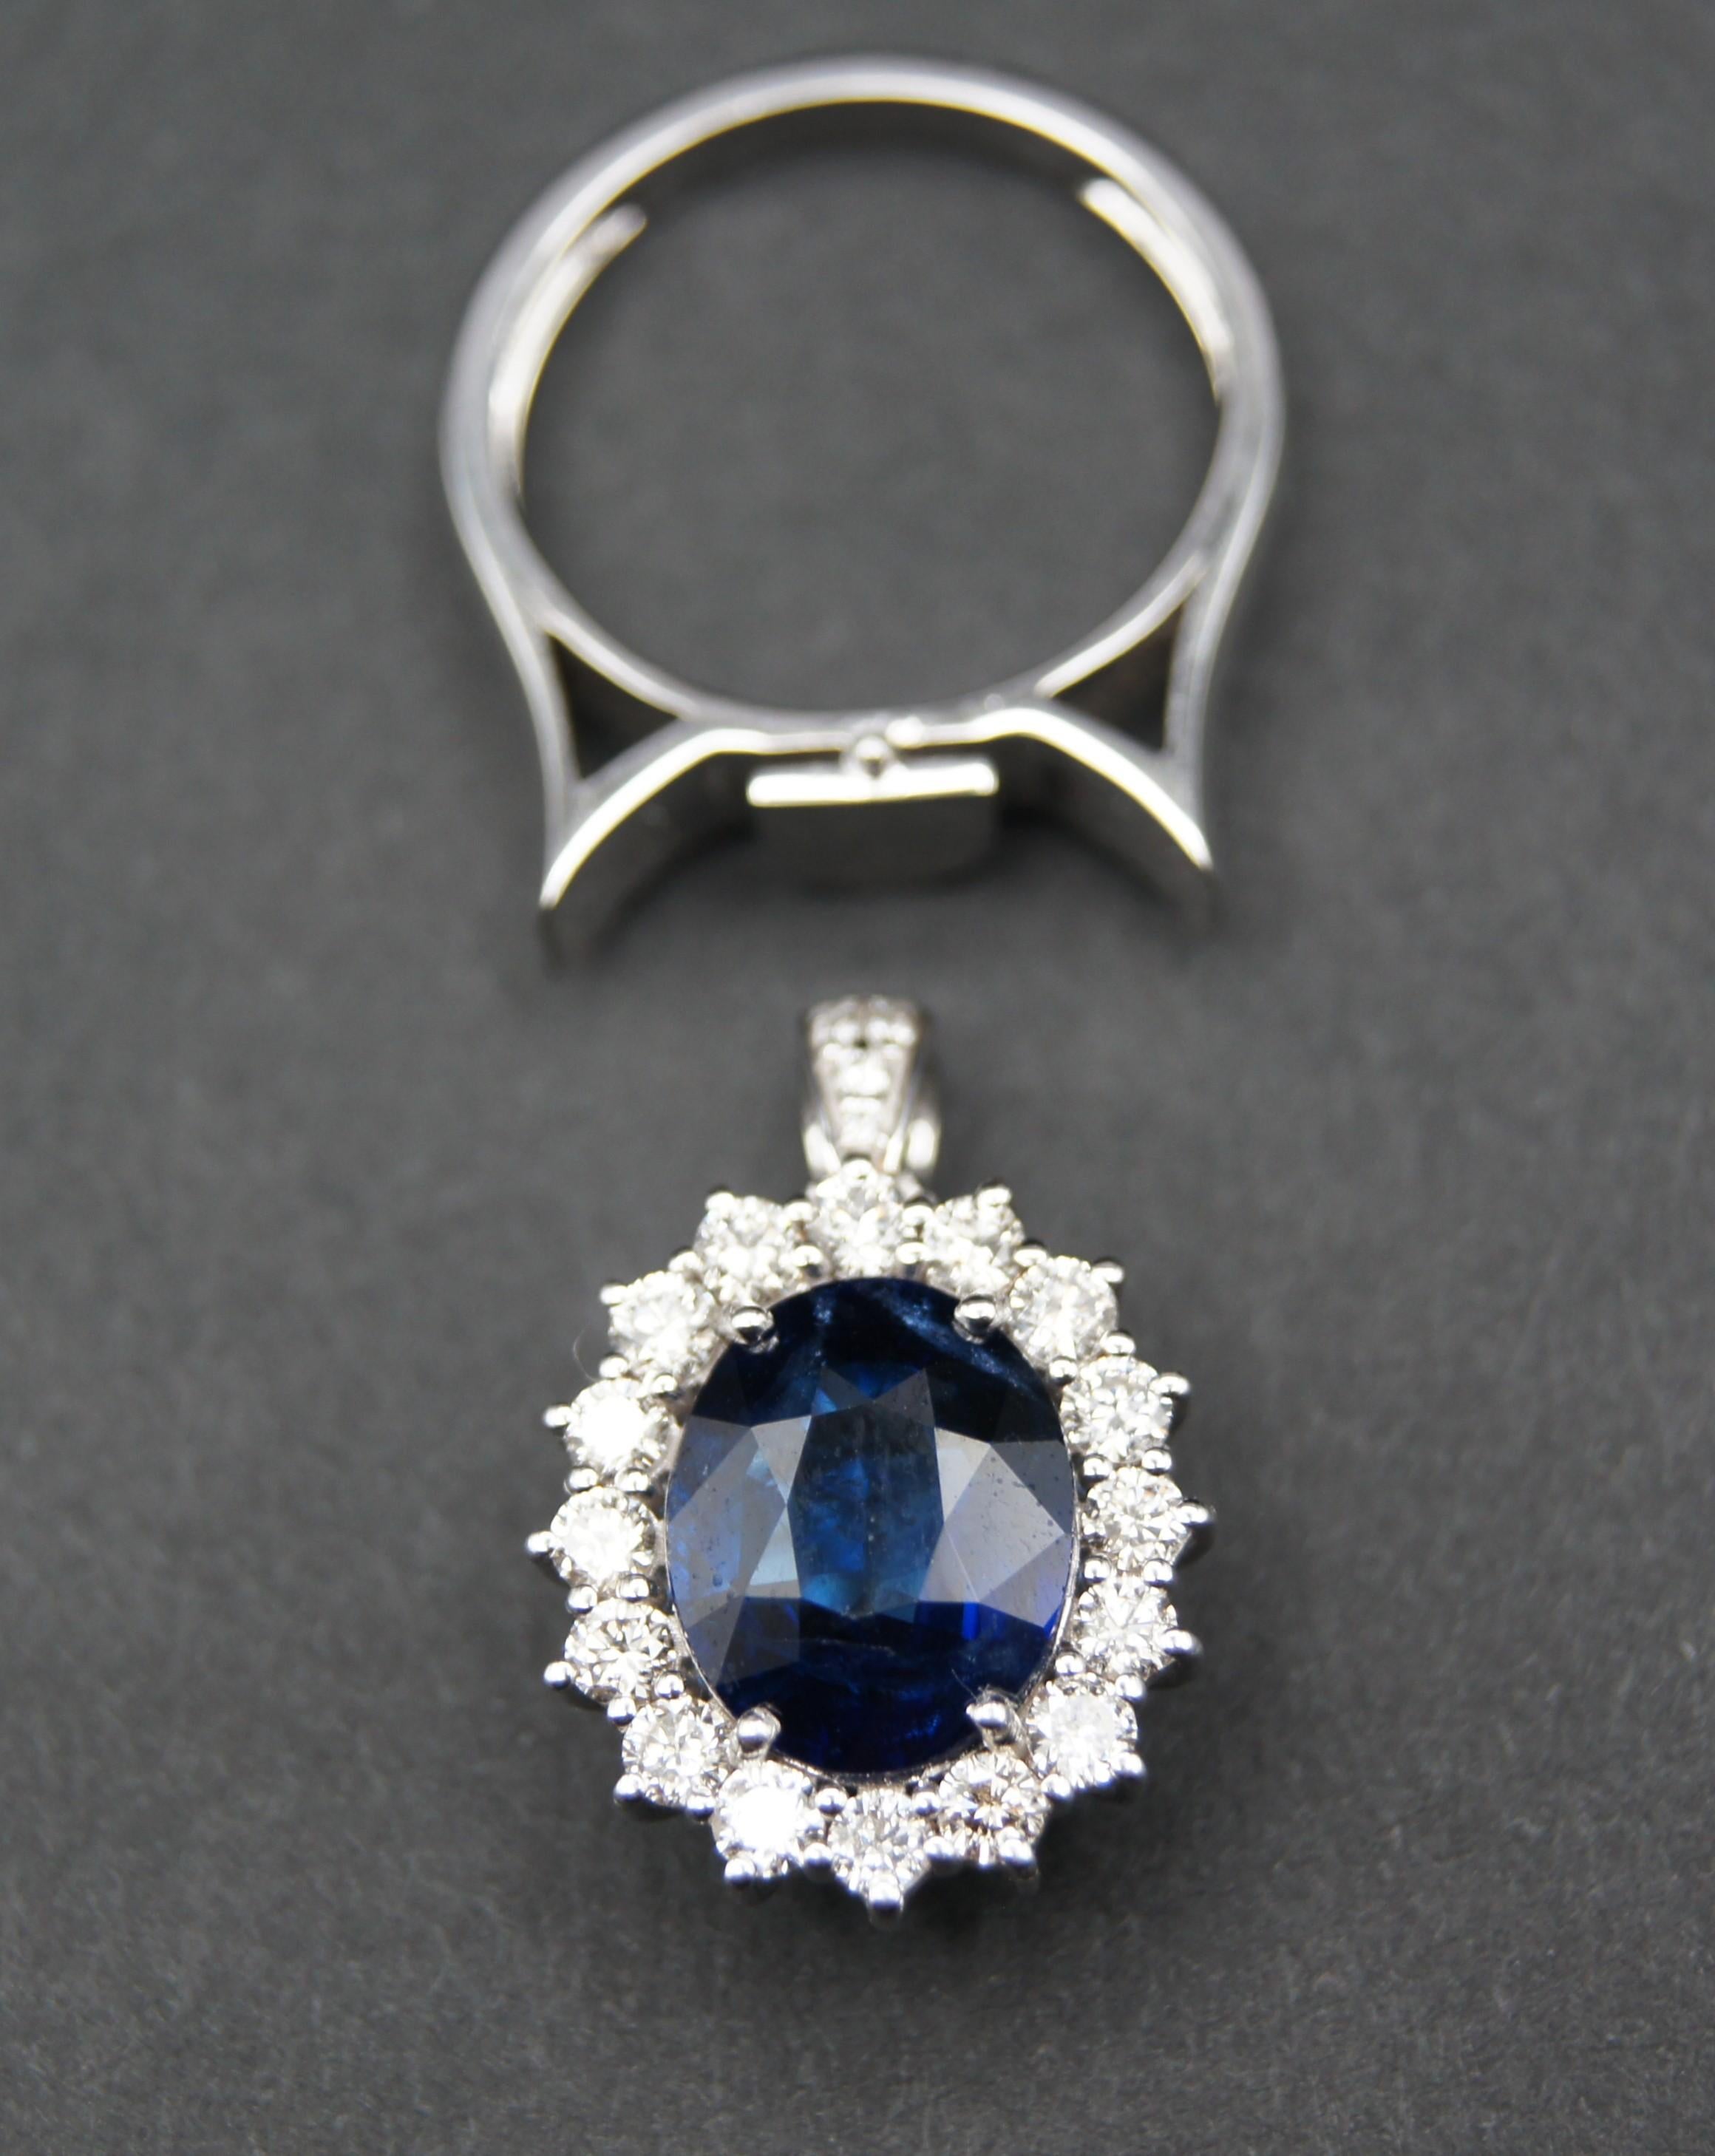 GFCO certified 4.45 carats Royal Blue Sapphire Ring-Pendant in 18K White Gold In New Condition For Sale In Westminster, CA